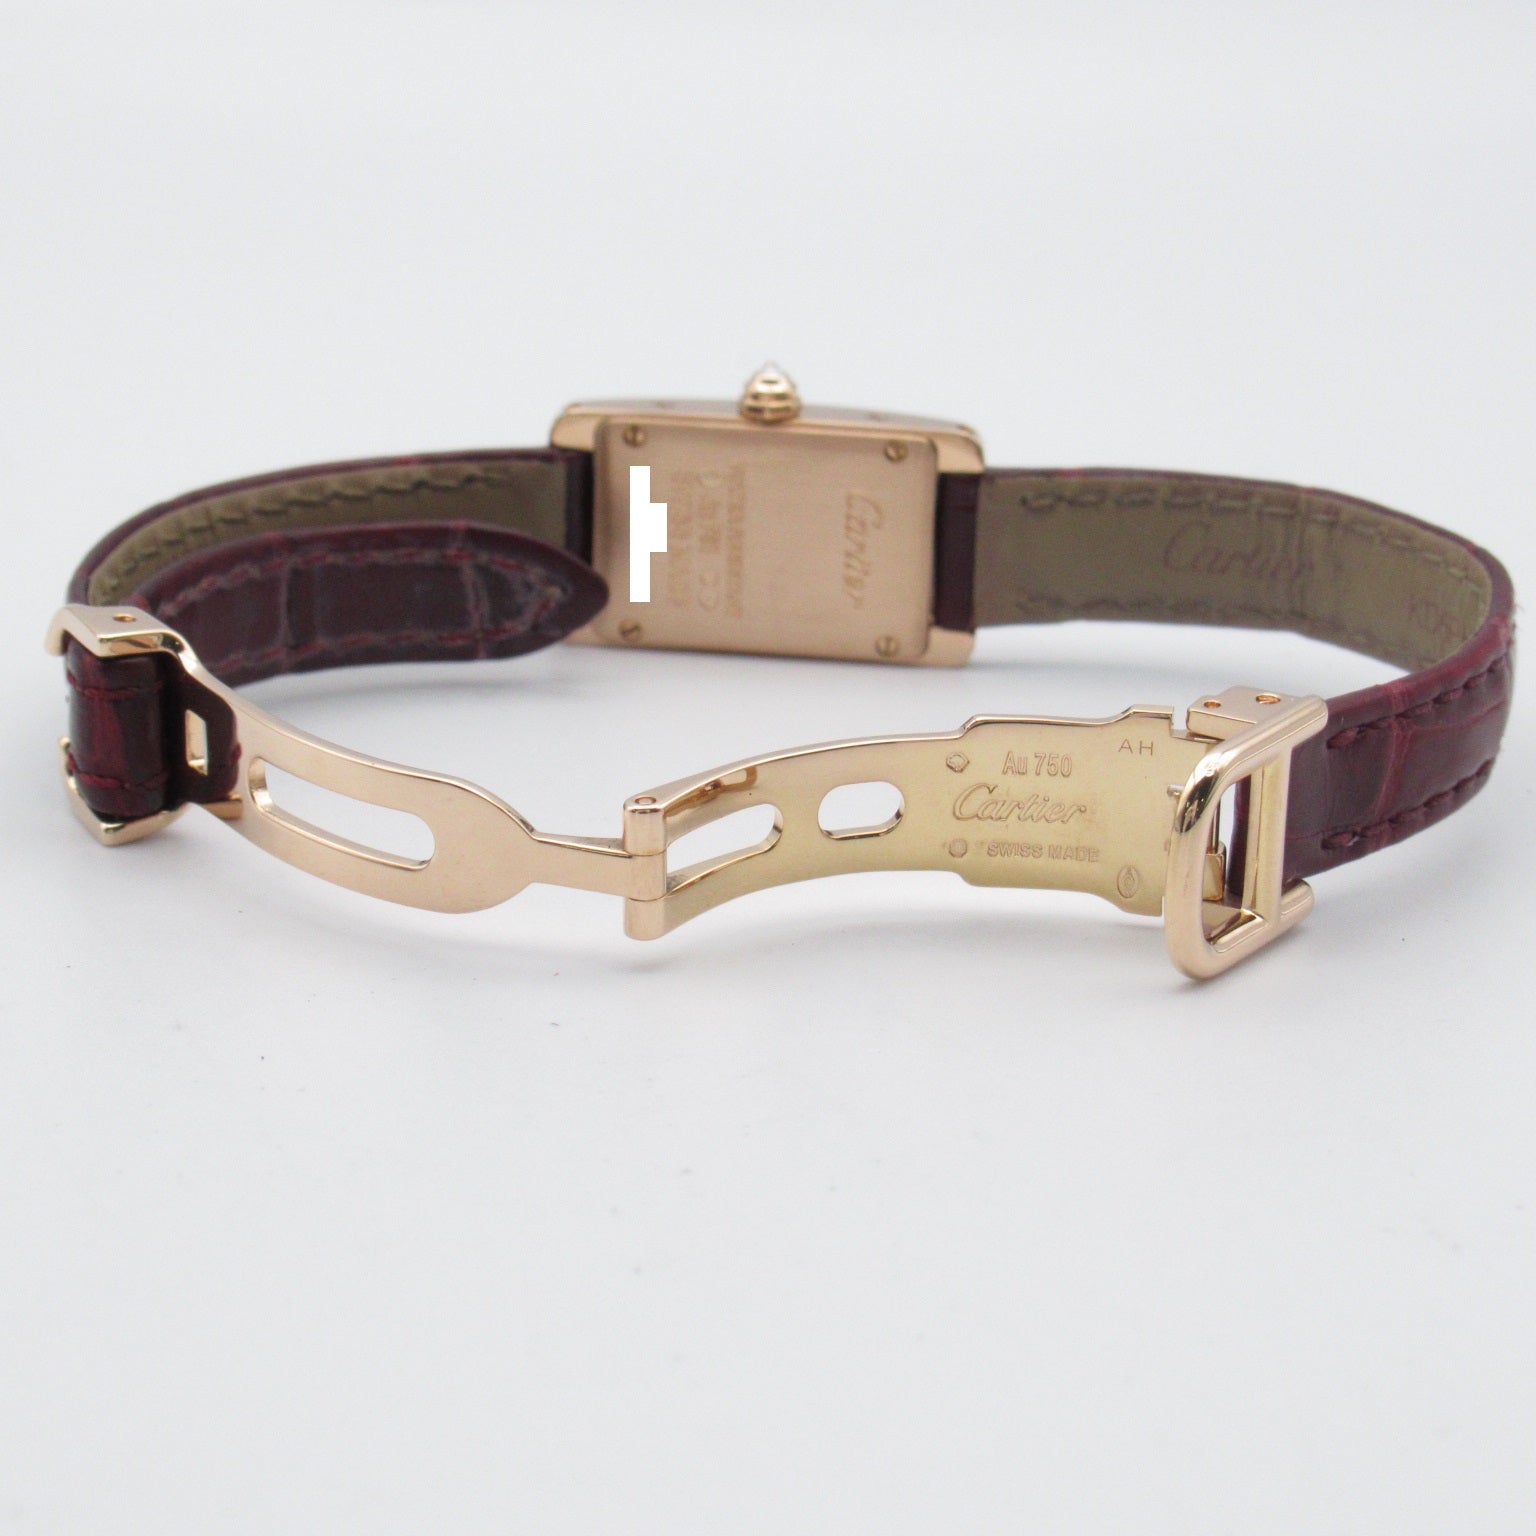 Cartier Cartier Tank American Mini Watch K18PG (Pink G) Leather Belt Alligator Leather WB710014 WB710014